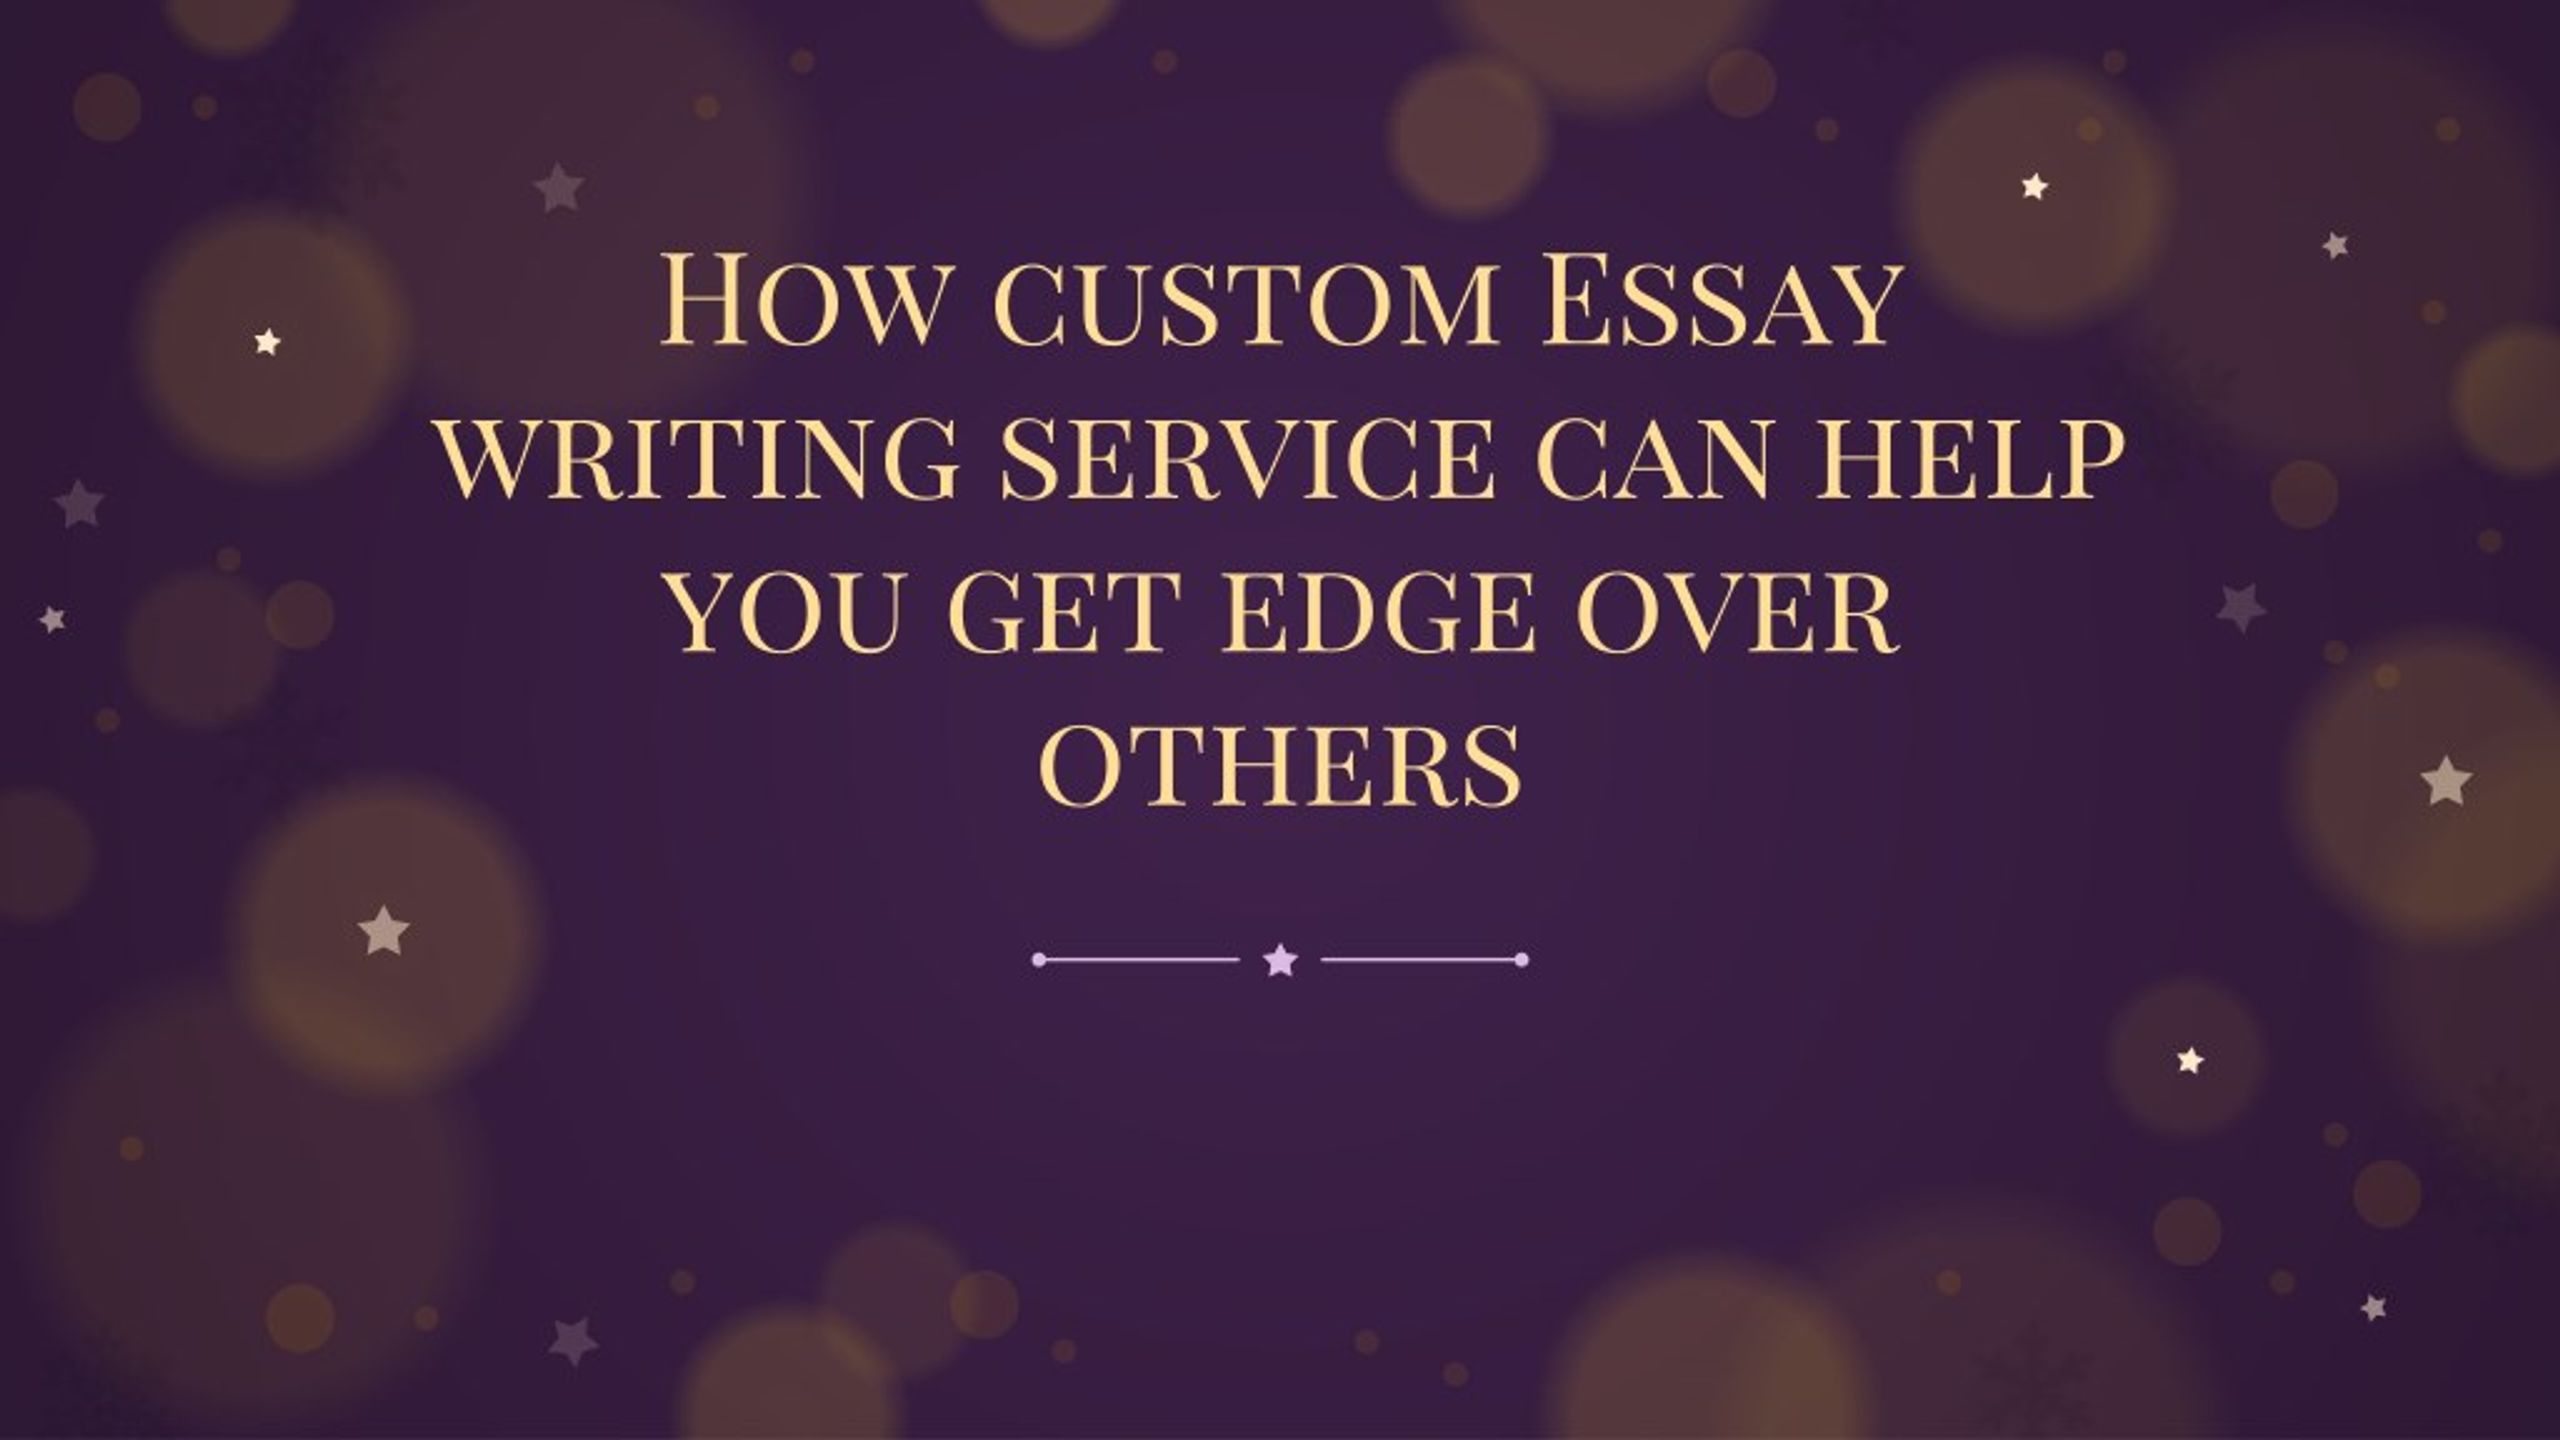 Short Story: The Truth About custom coursework writing